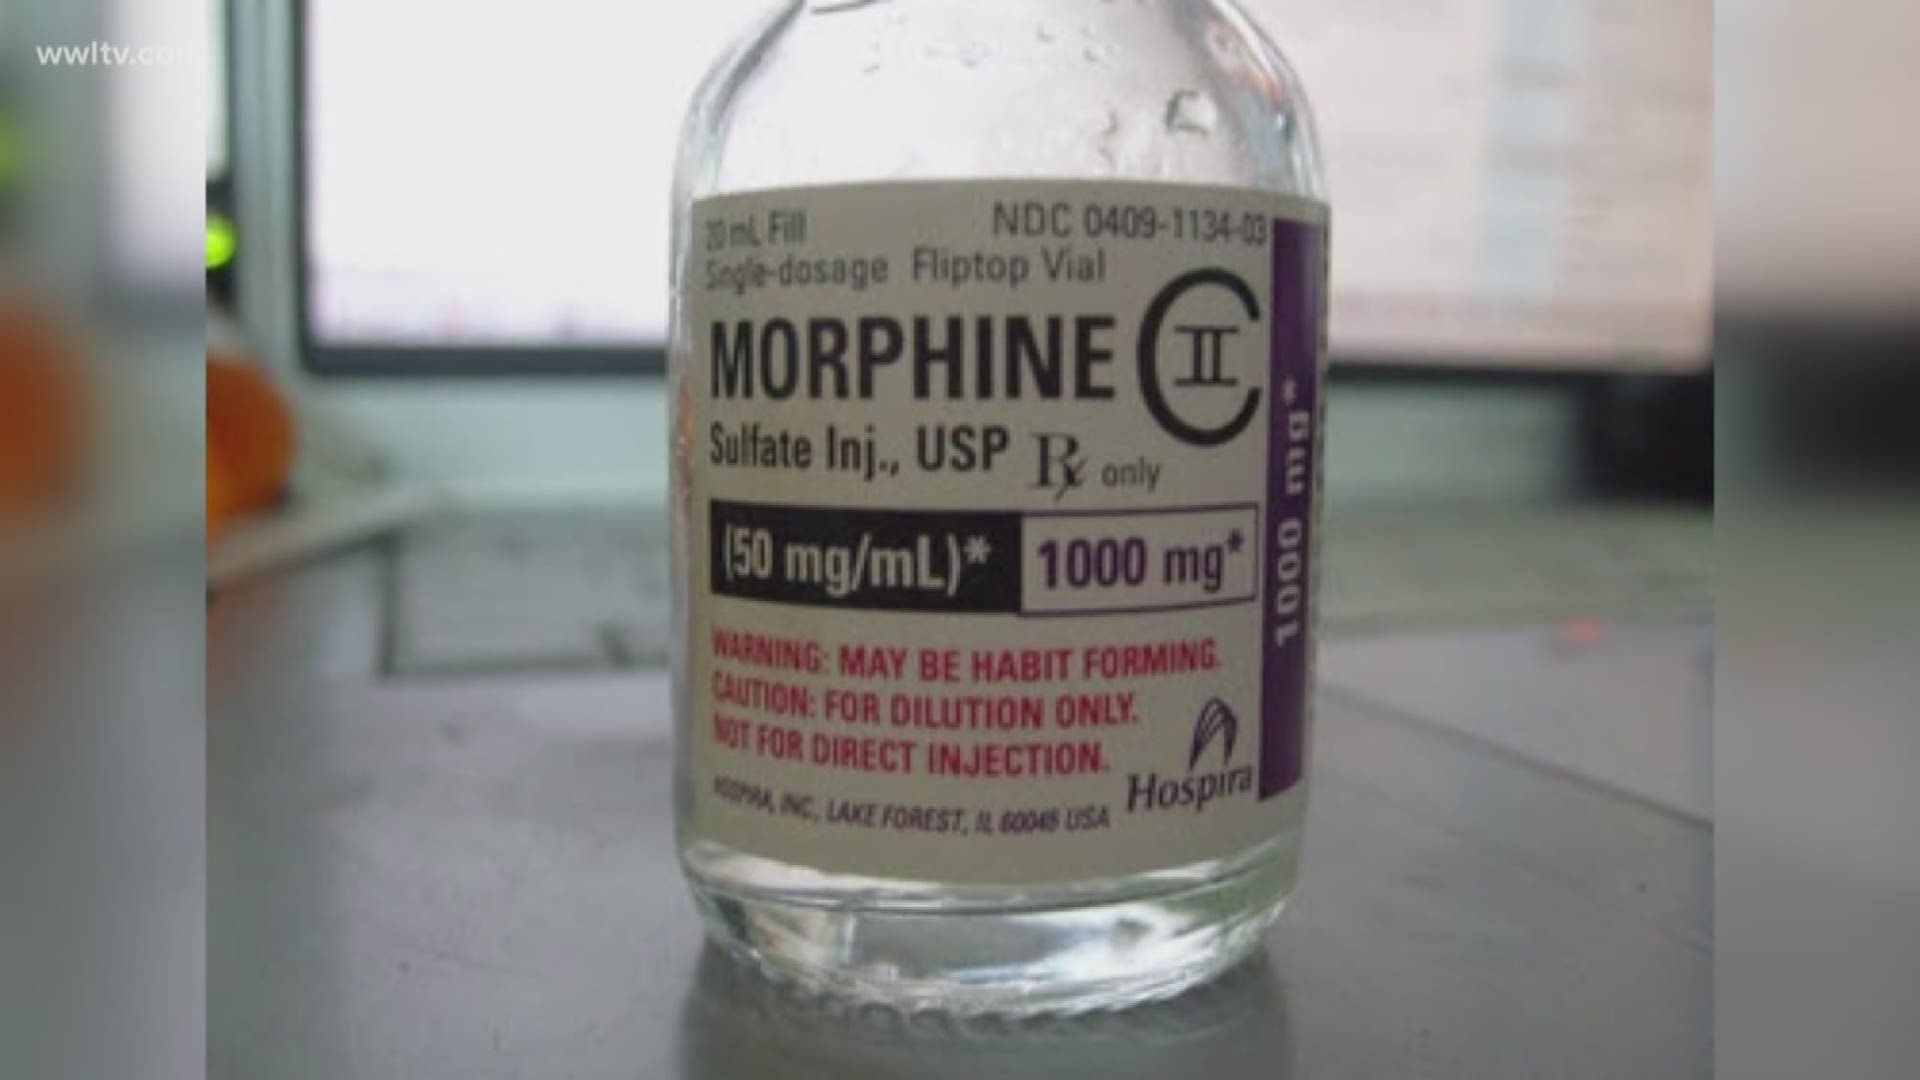 Fentanyl is being used since hospitals both locally and nationally are seeing a shortage in Morphine.